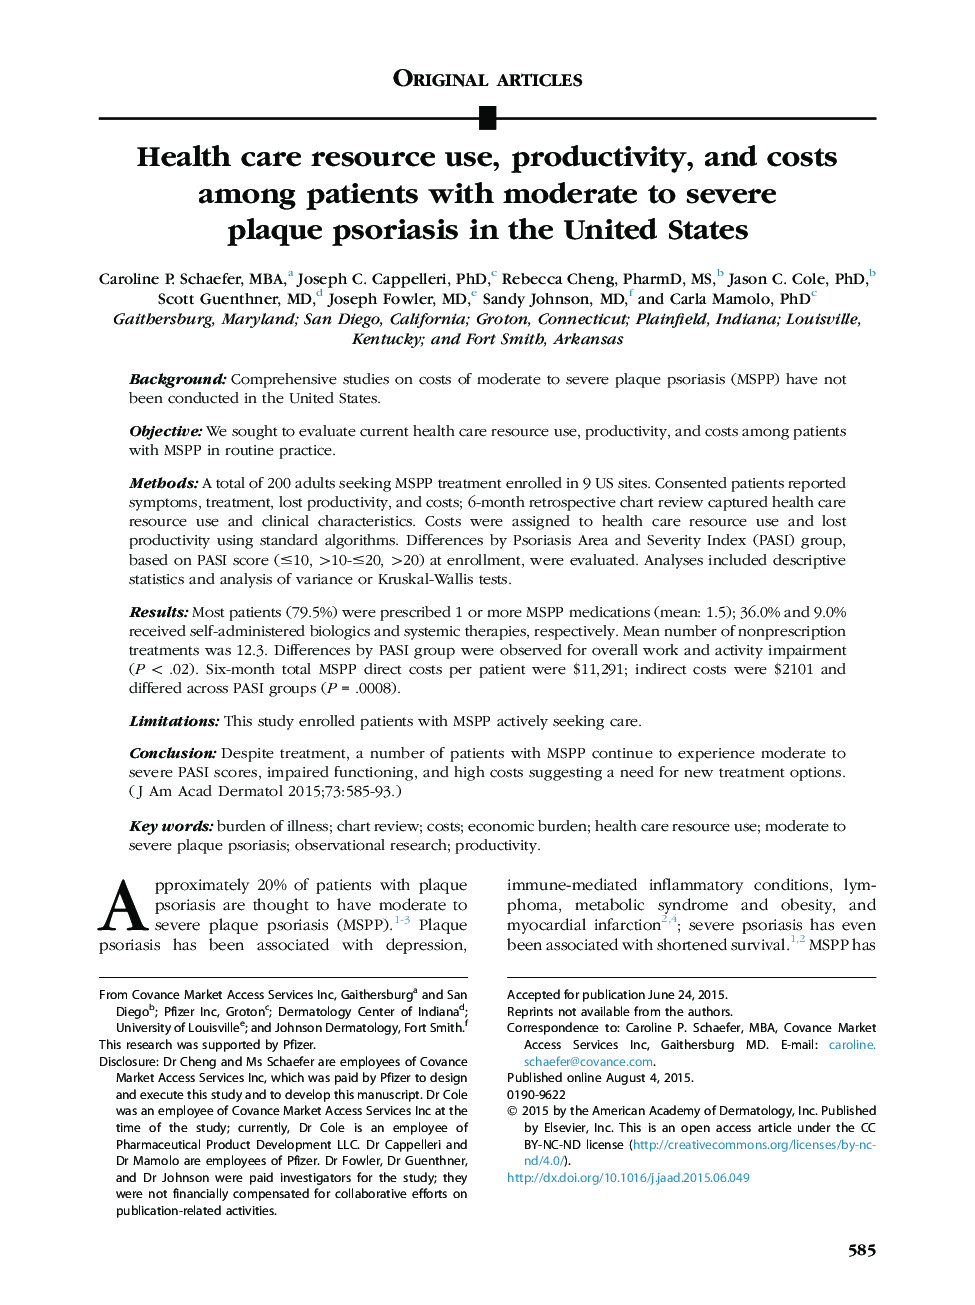 Original articleHealth care resource use, productivity, and costs among patients with moderate to severe plaque psoriasis in the United States